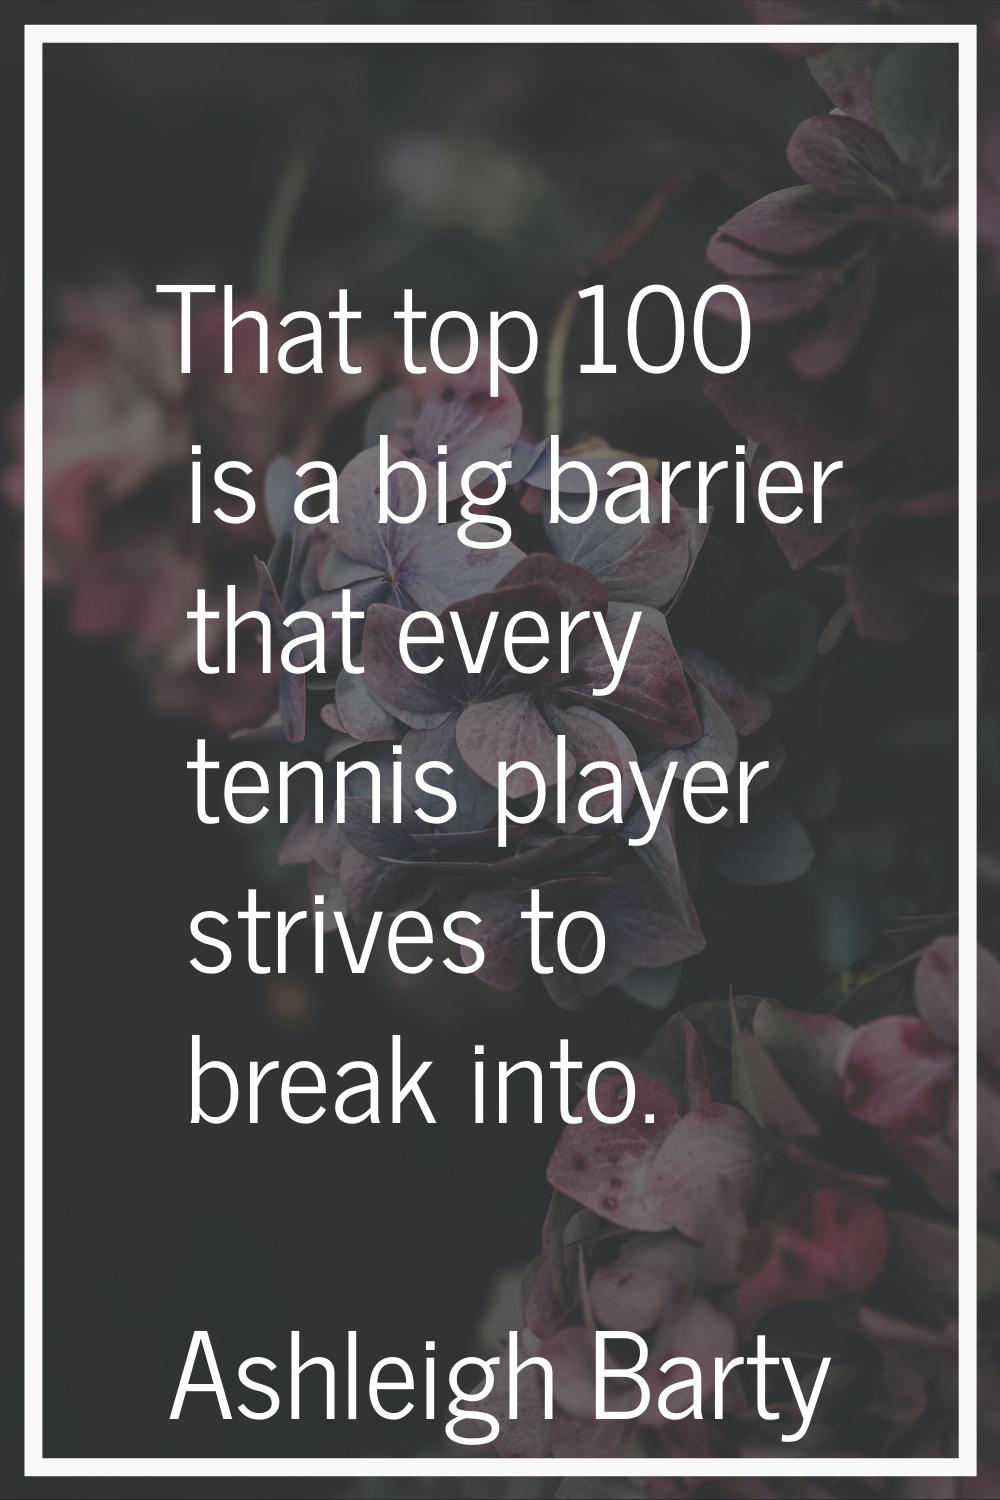 That top 100 is a big barrier that every tennis player strives to break into.